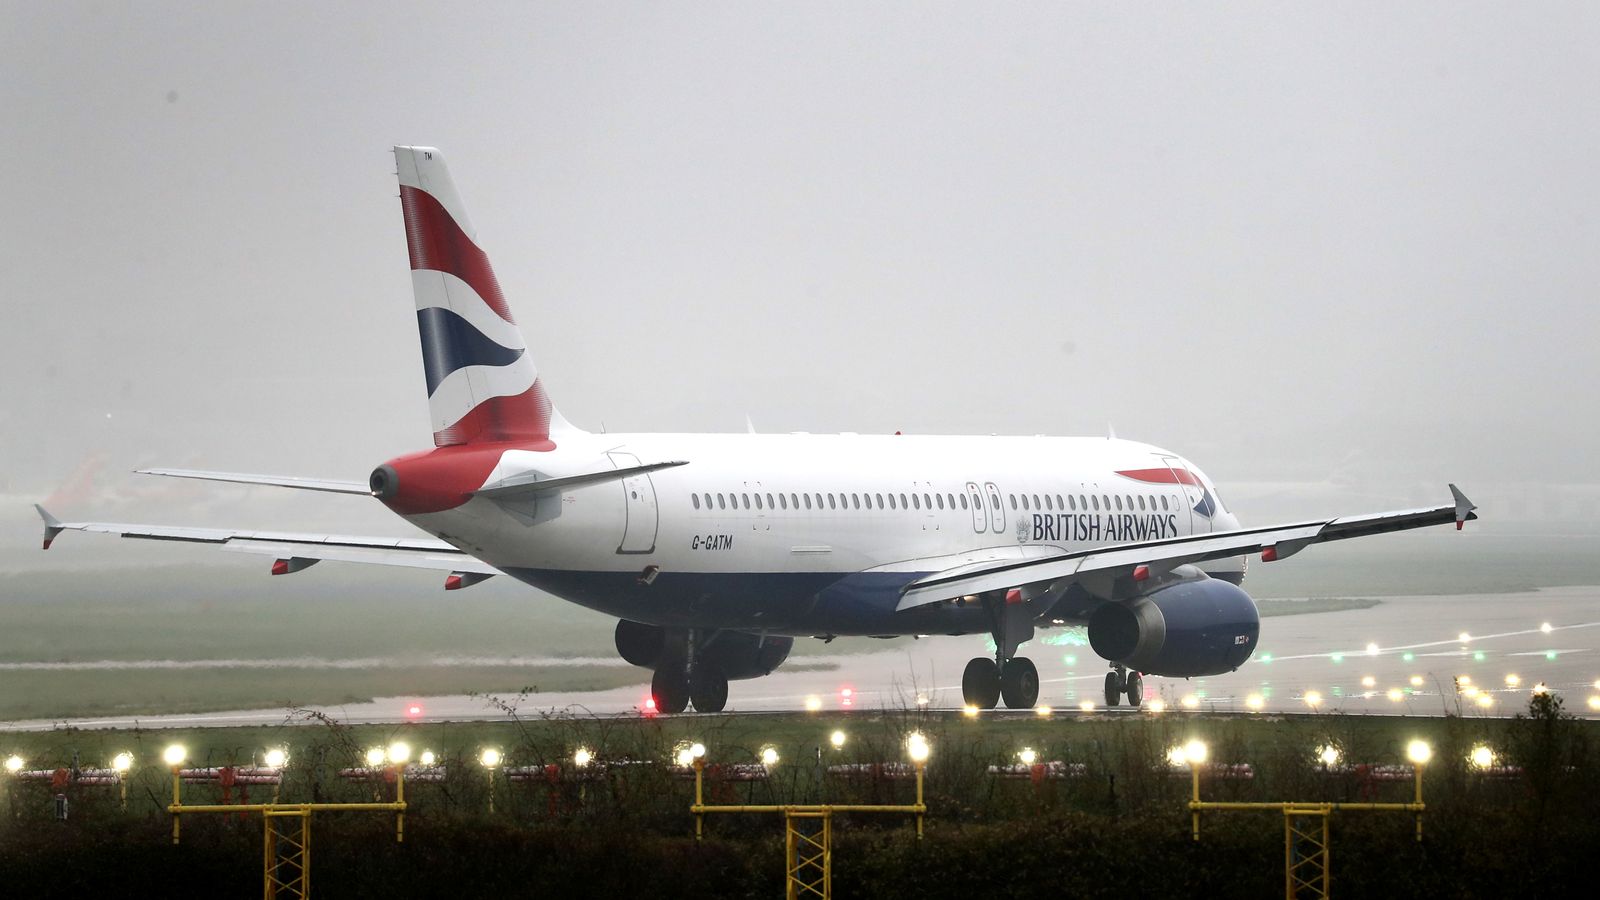 British Airways check-in staff at Heathrow to be balloted for strike action in pay dispute